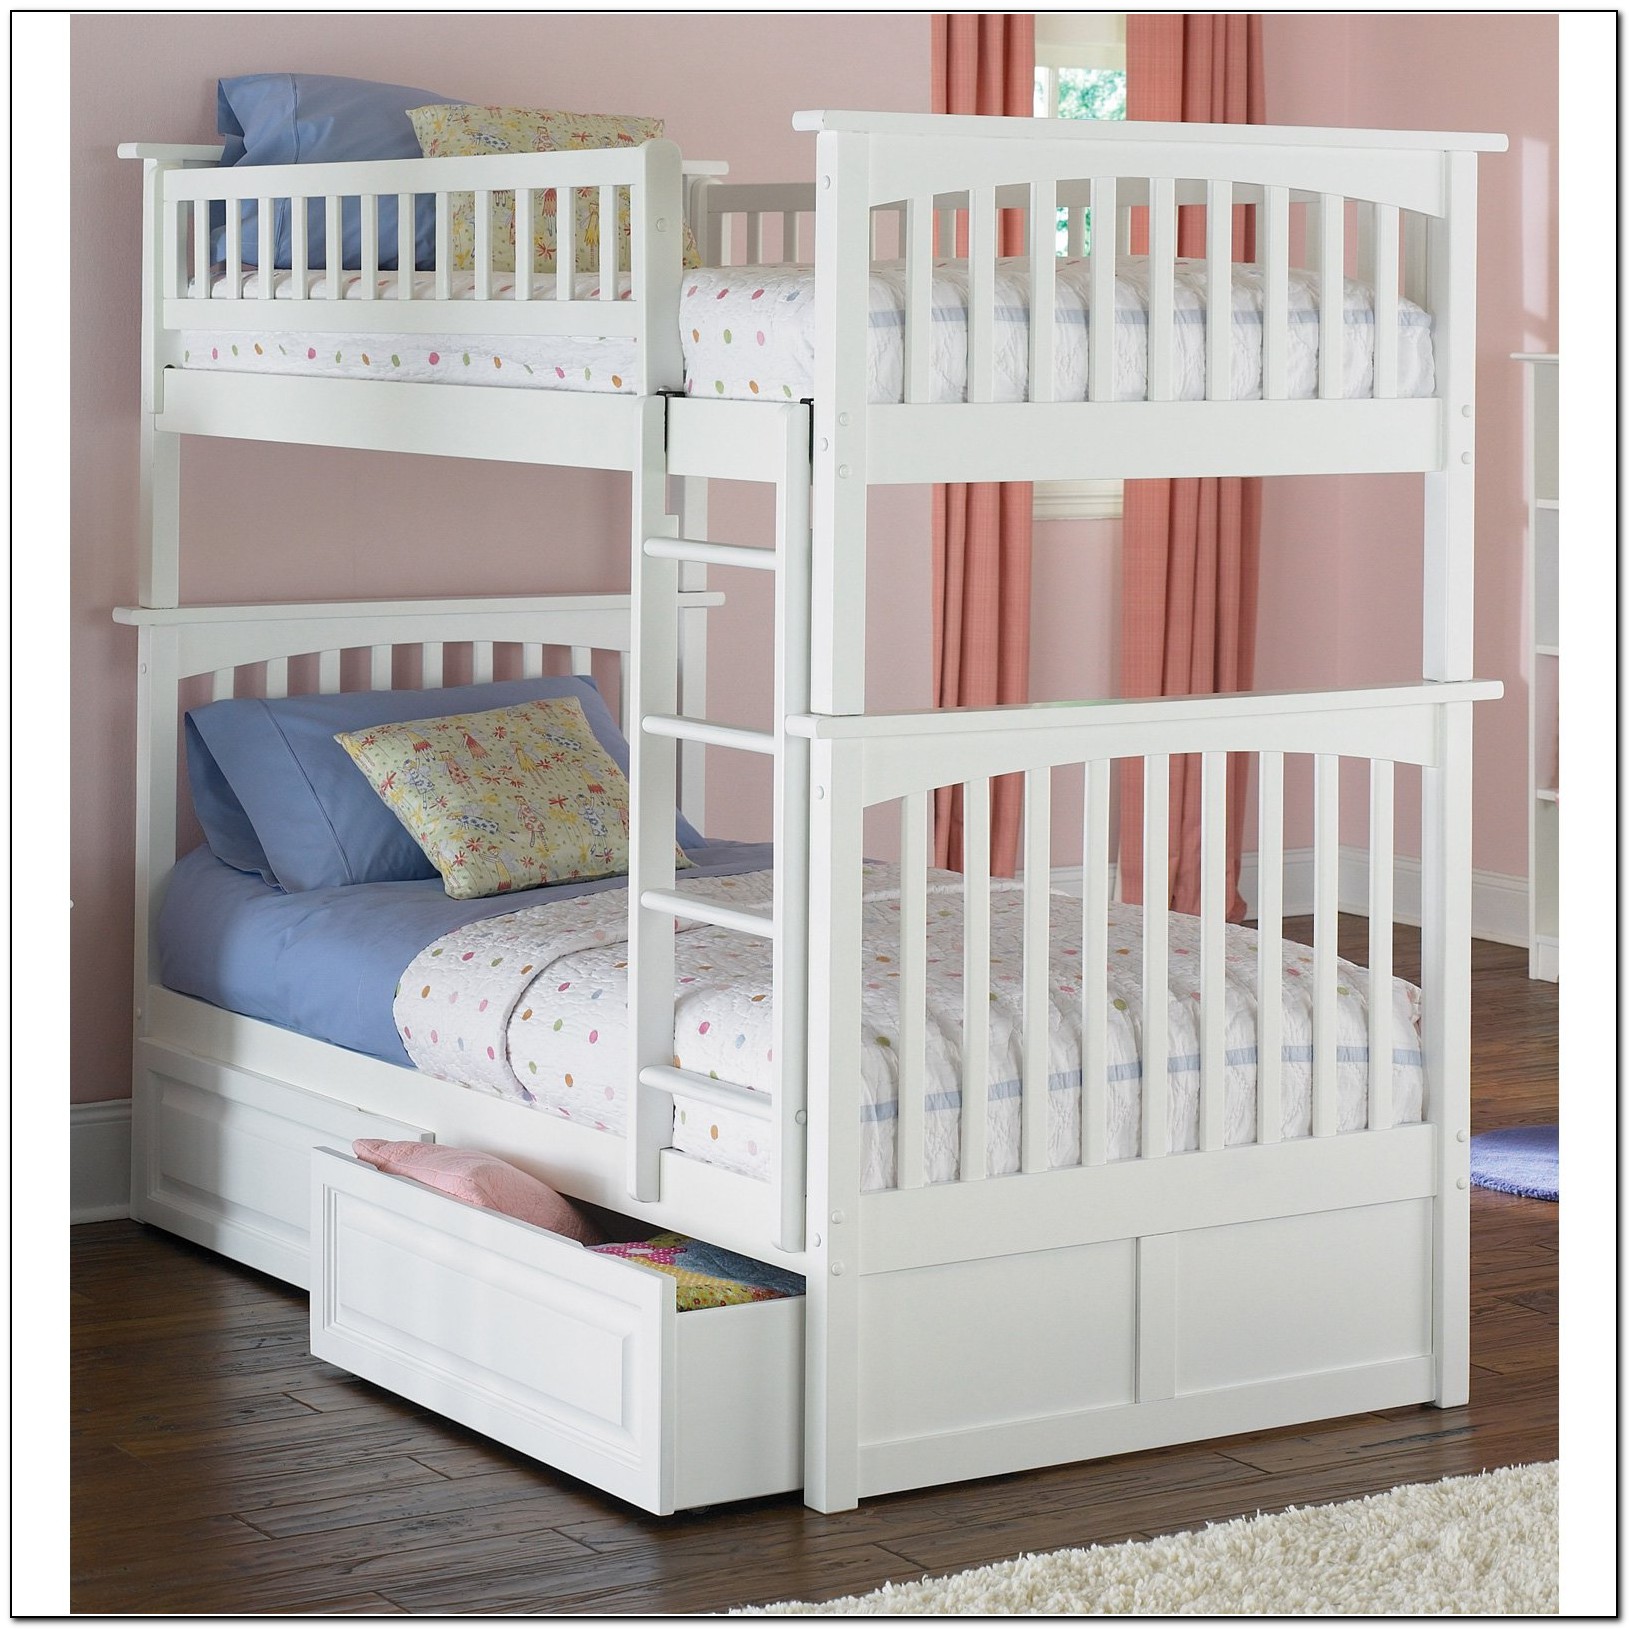 Twin Bunk Beds For Girls